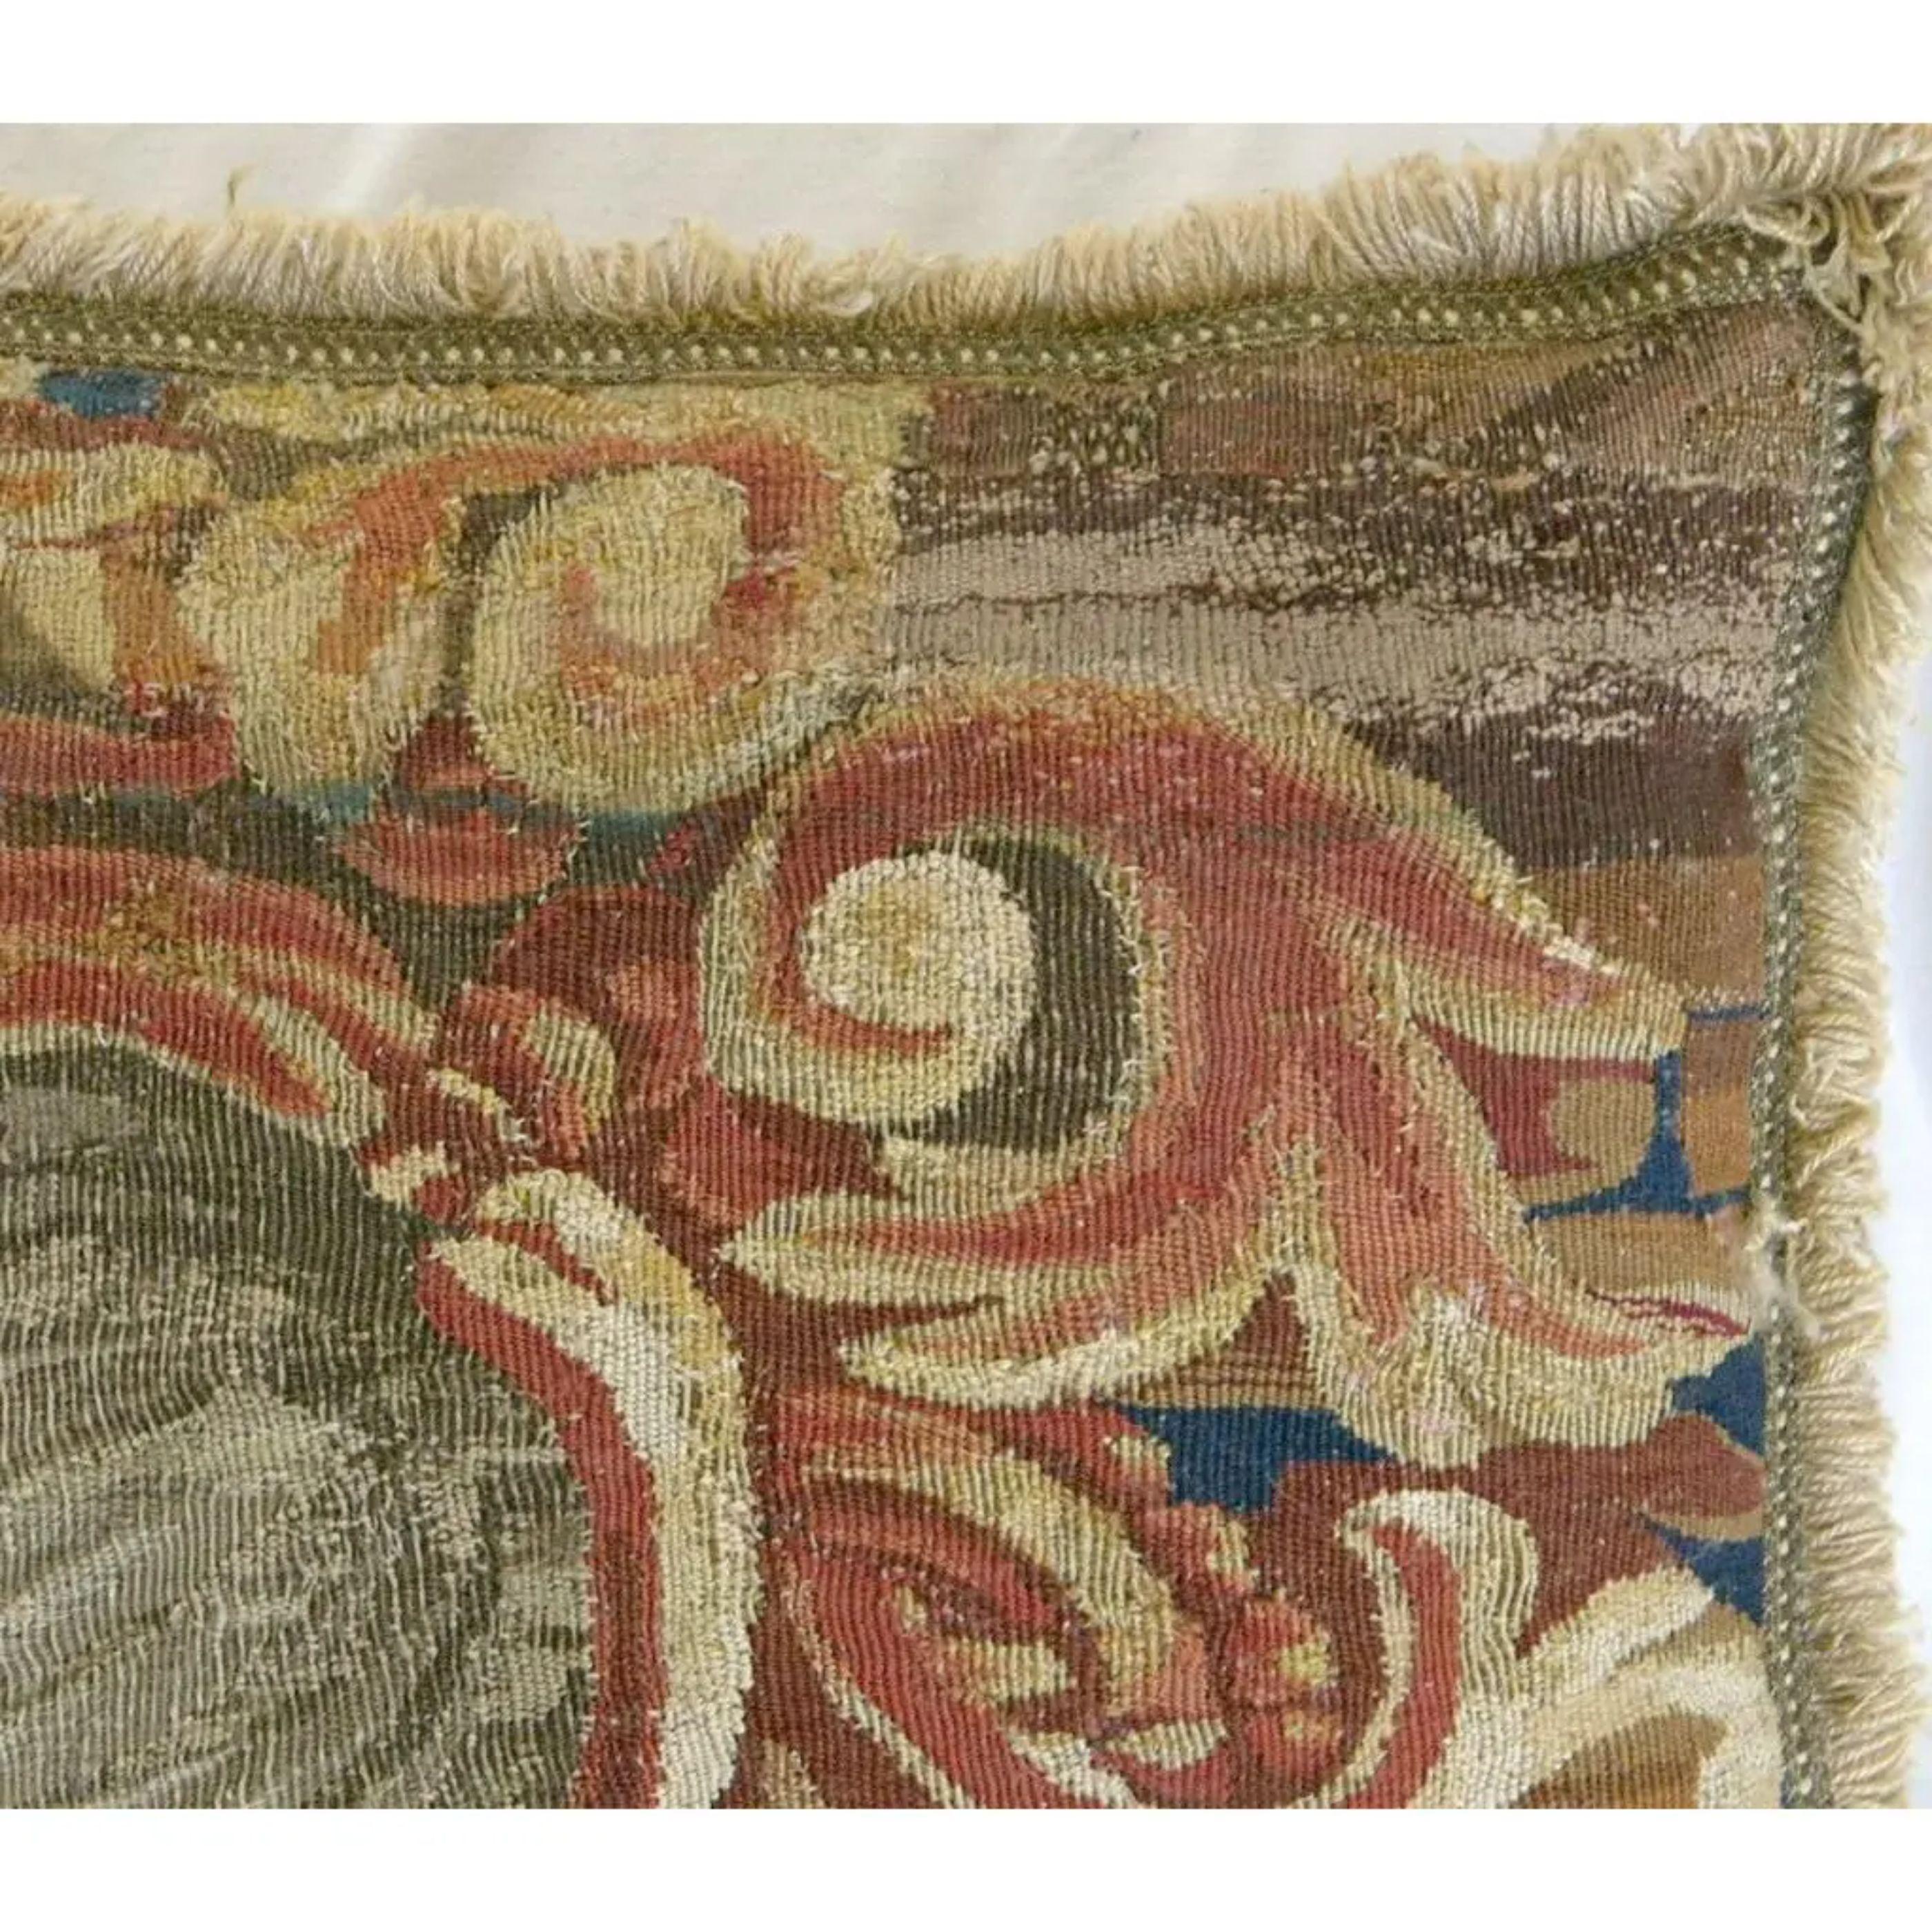 Antique 16th century Brussels tapestry pillow. 15'' X 12'' x 6''.